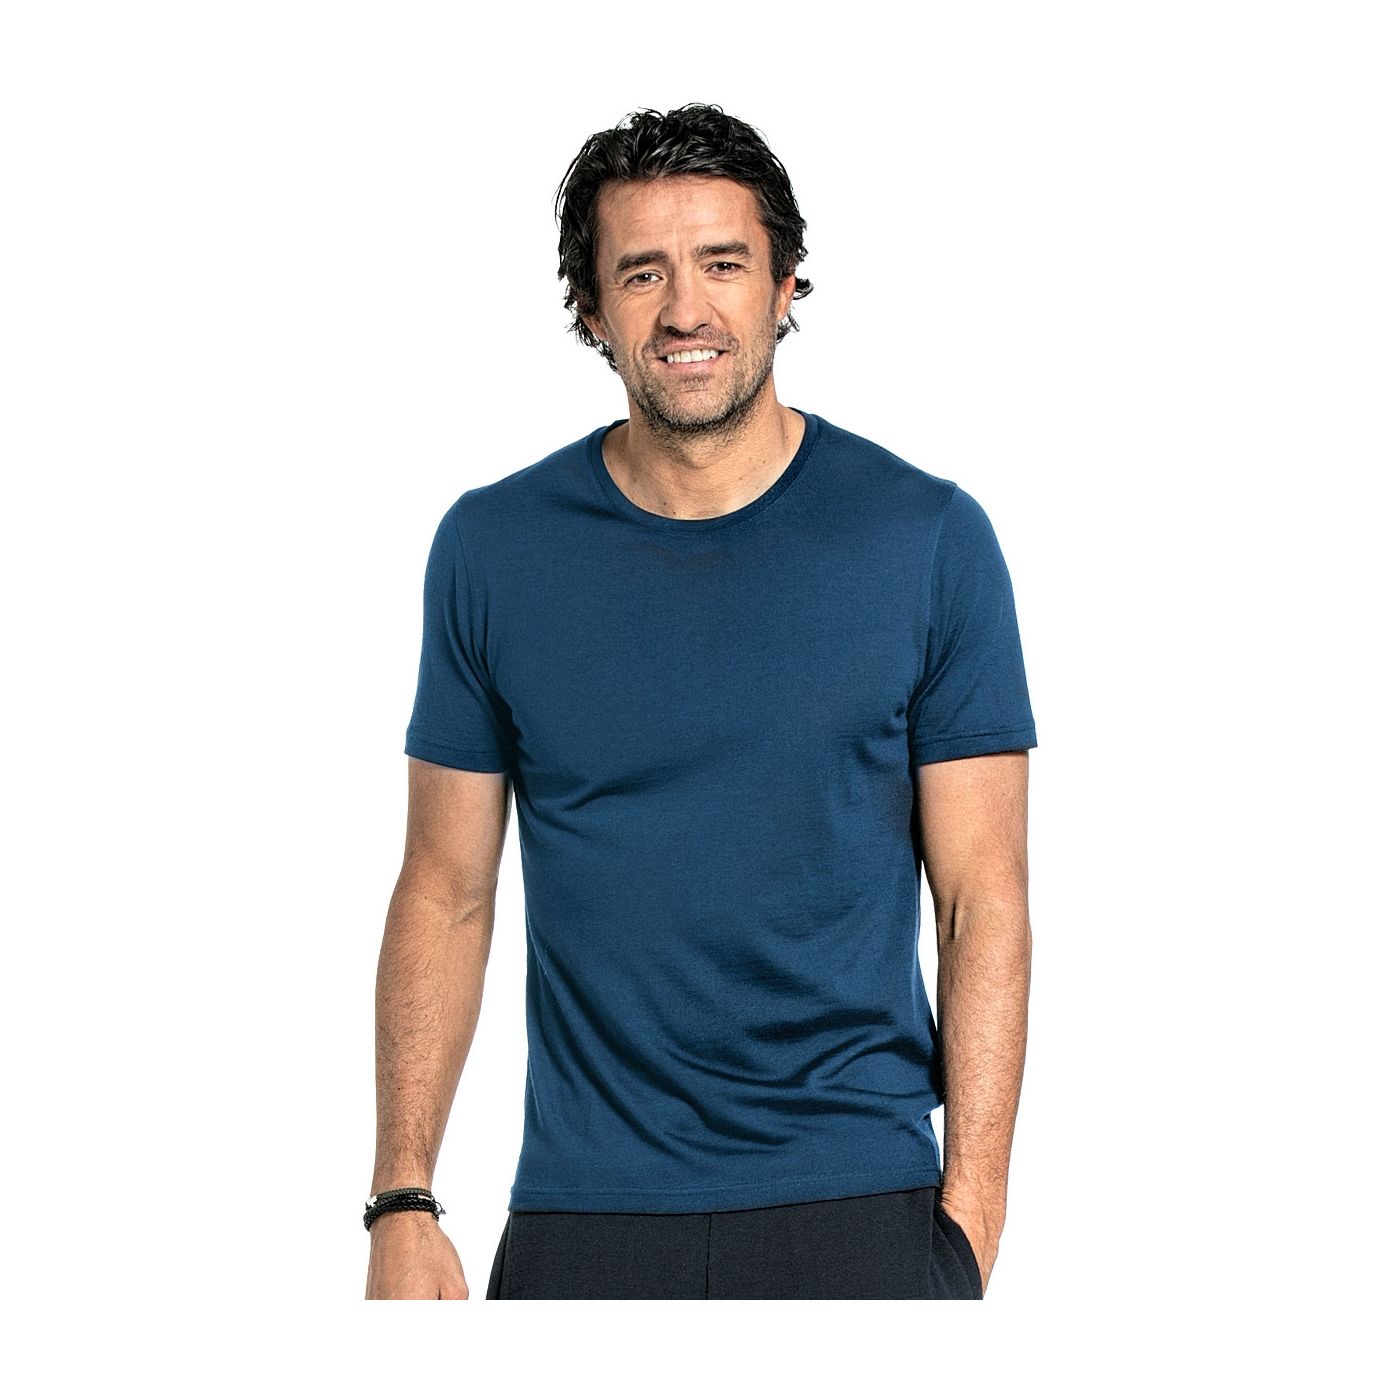 Crew neck T-shirt for men made of Merino wool in Bright blue